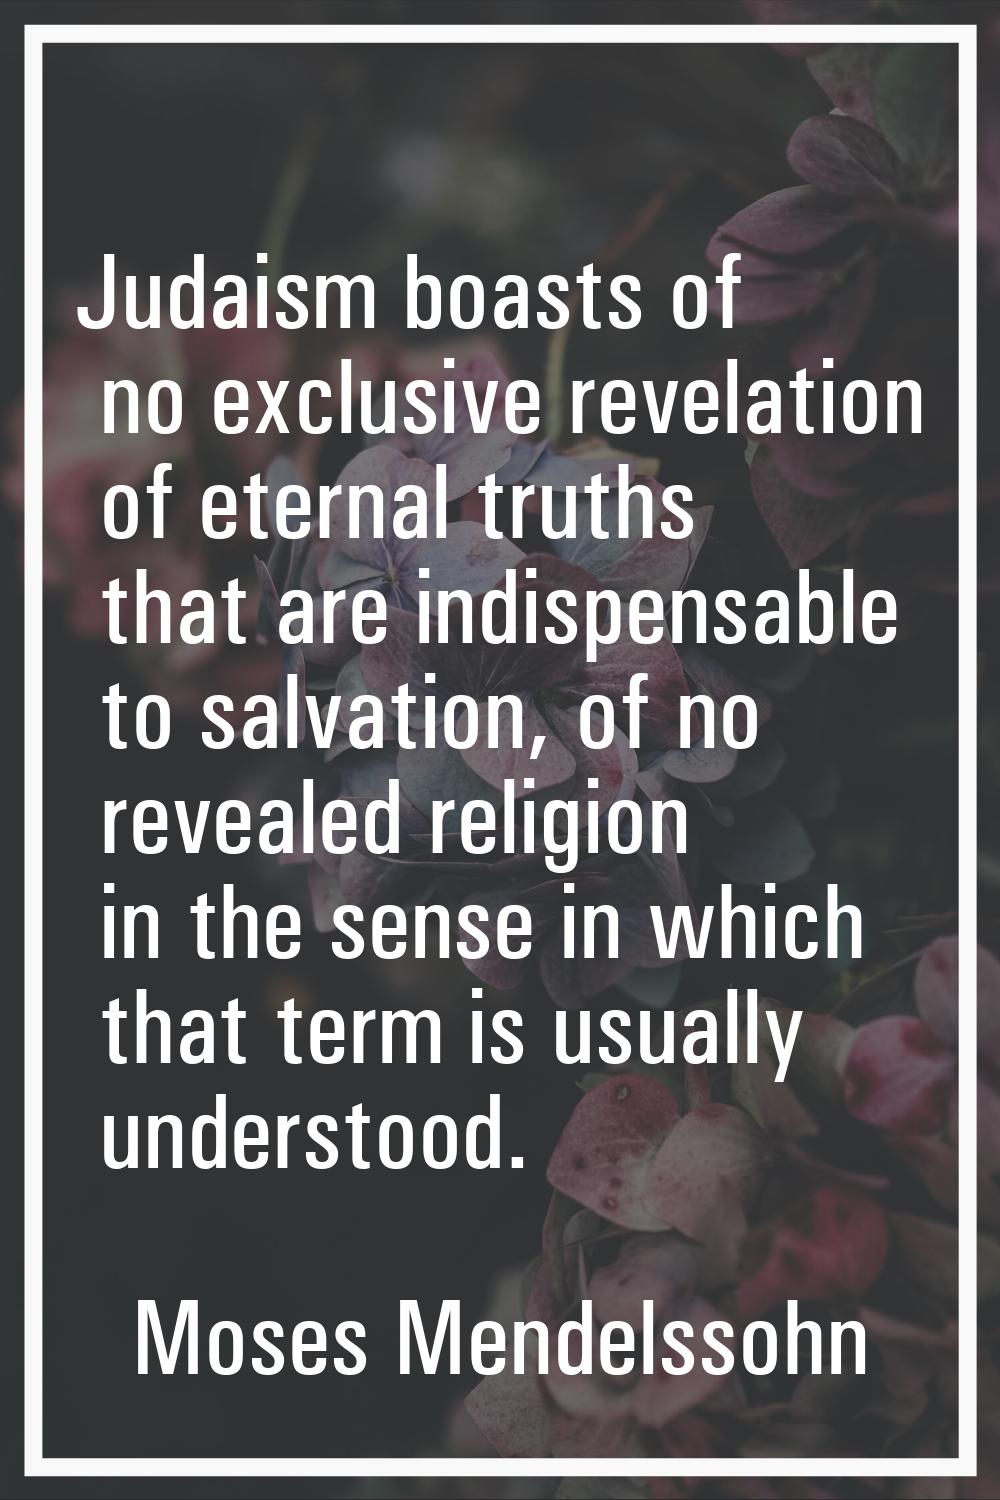 Judaism boasts of no exclusive revelation of eternal truths that are indispensable to salvation, of